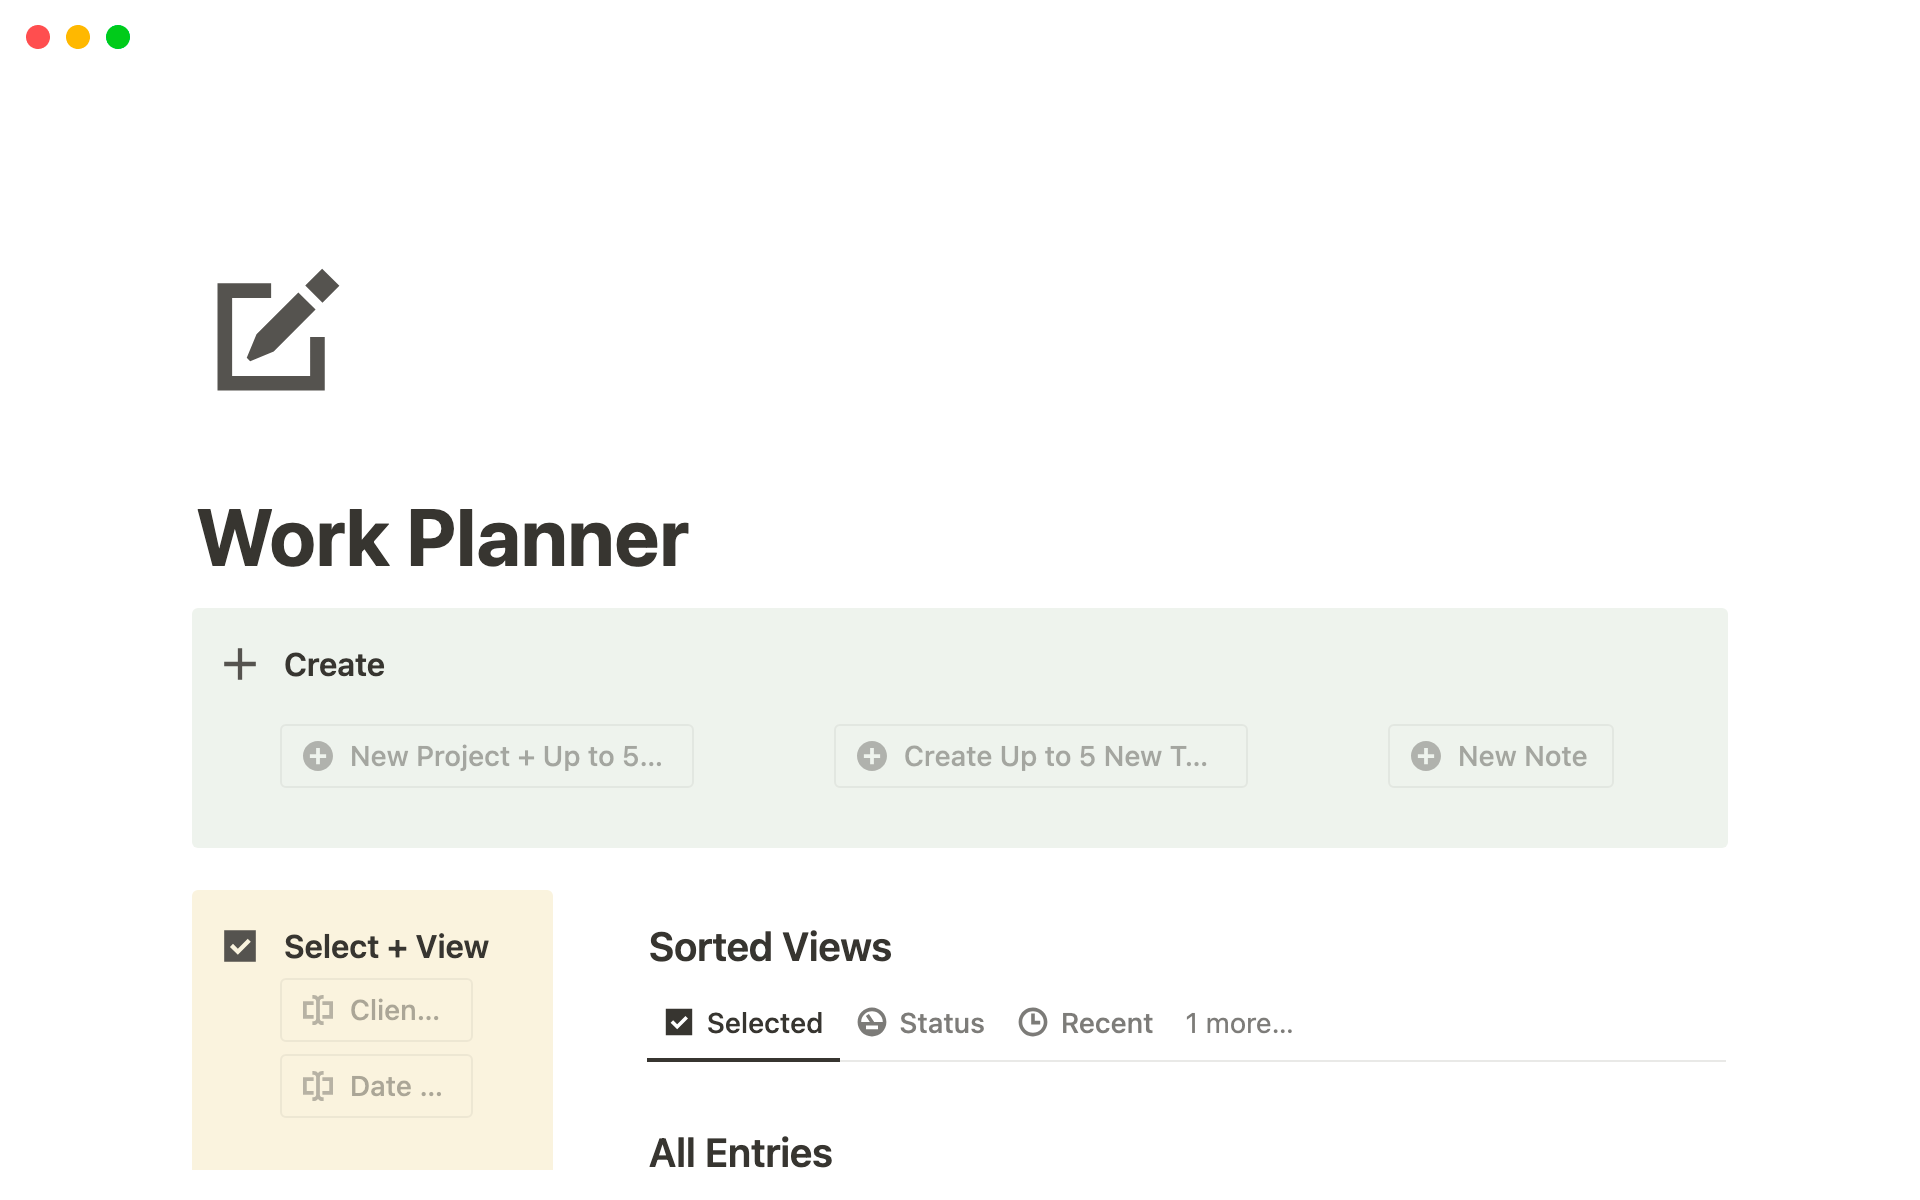 This one page work planner simplifies your project management and productivity by centralizing everything into one page view.